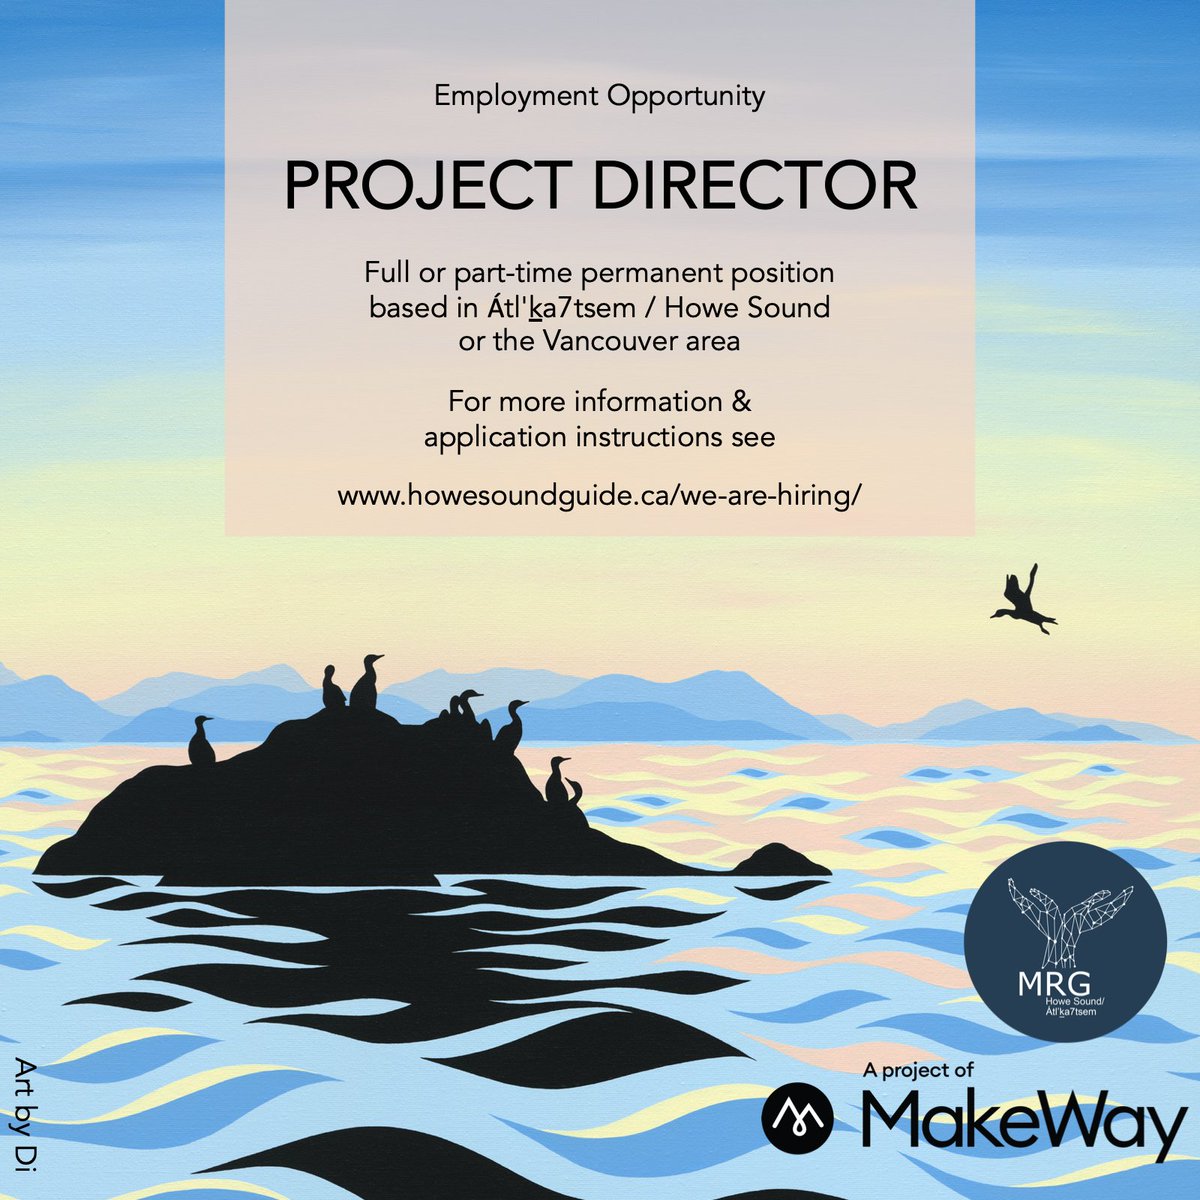 #JobAlert #JobOpportunity

@HSA_MarineGuide, a project of @MakeWay, is seeking a Project Director! Come join a great team & community that are working 2 protect ocean & community health in #HoweSound/Átl'ka7tsem! 

Apply here: howesoundguide.ca/we-are-hiring/ 

Closes Nov 12, 2021

Plz RT